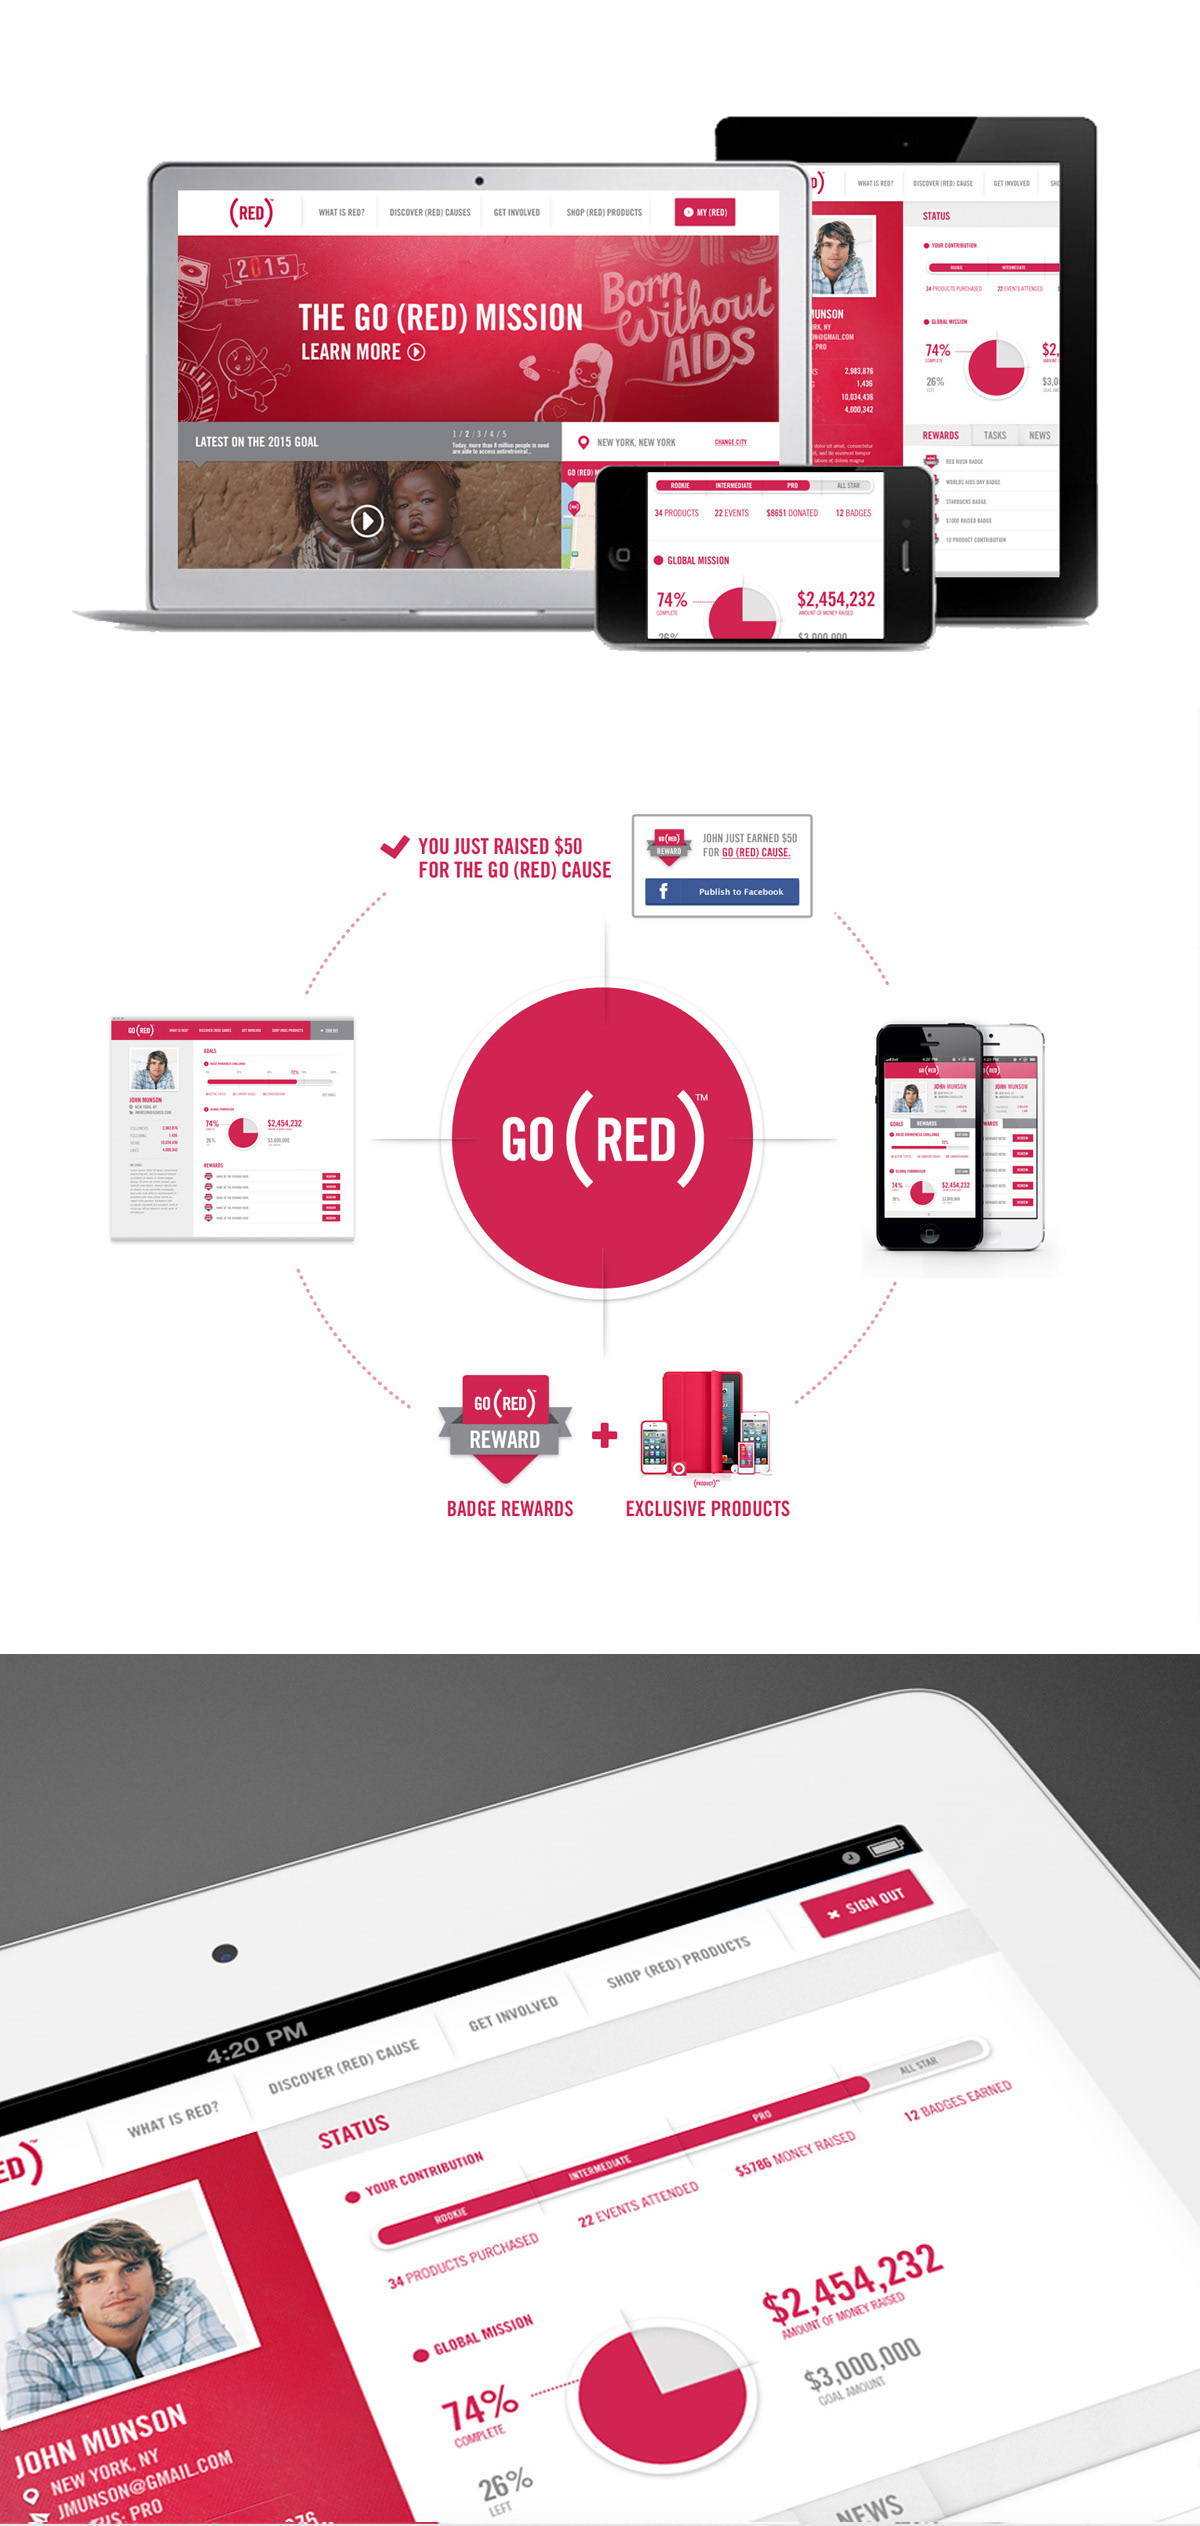 red mobile user interface UI Born without AIDS user profile infographics